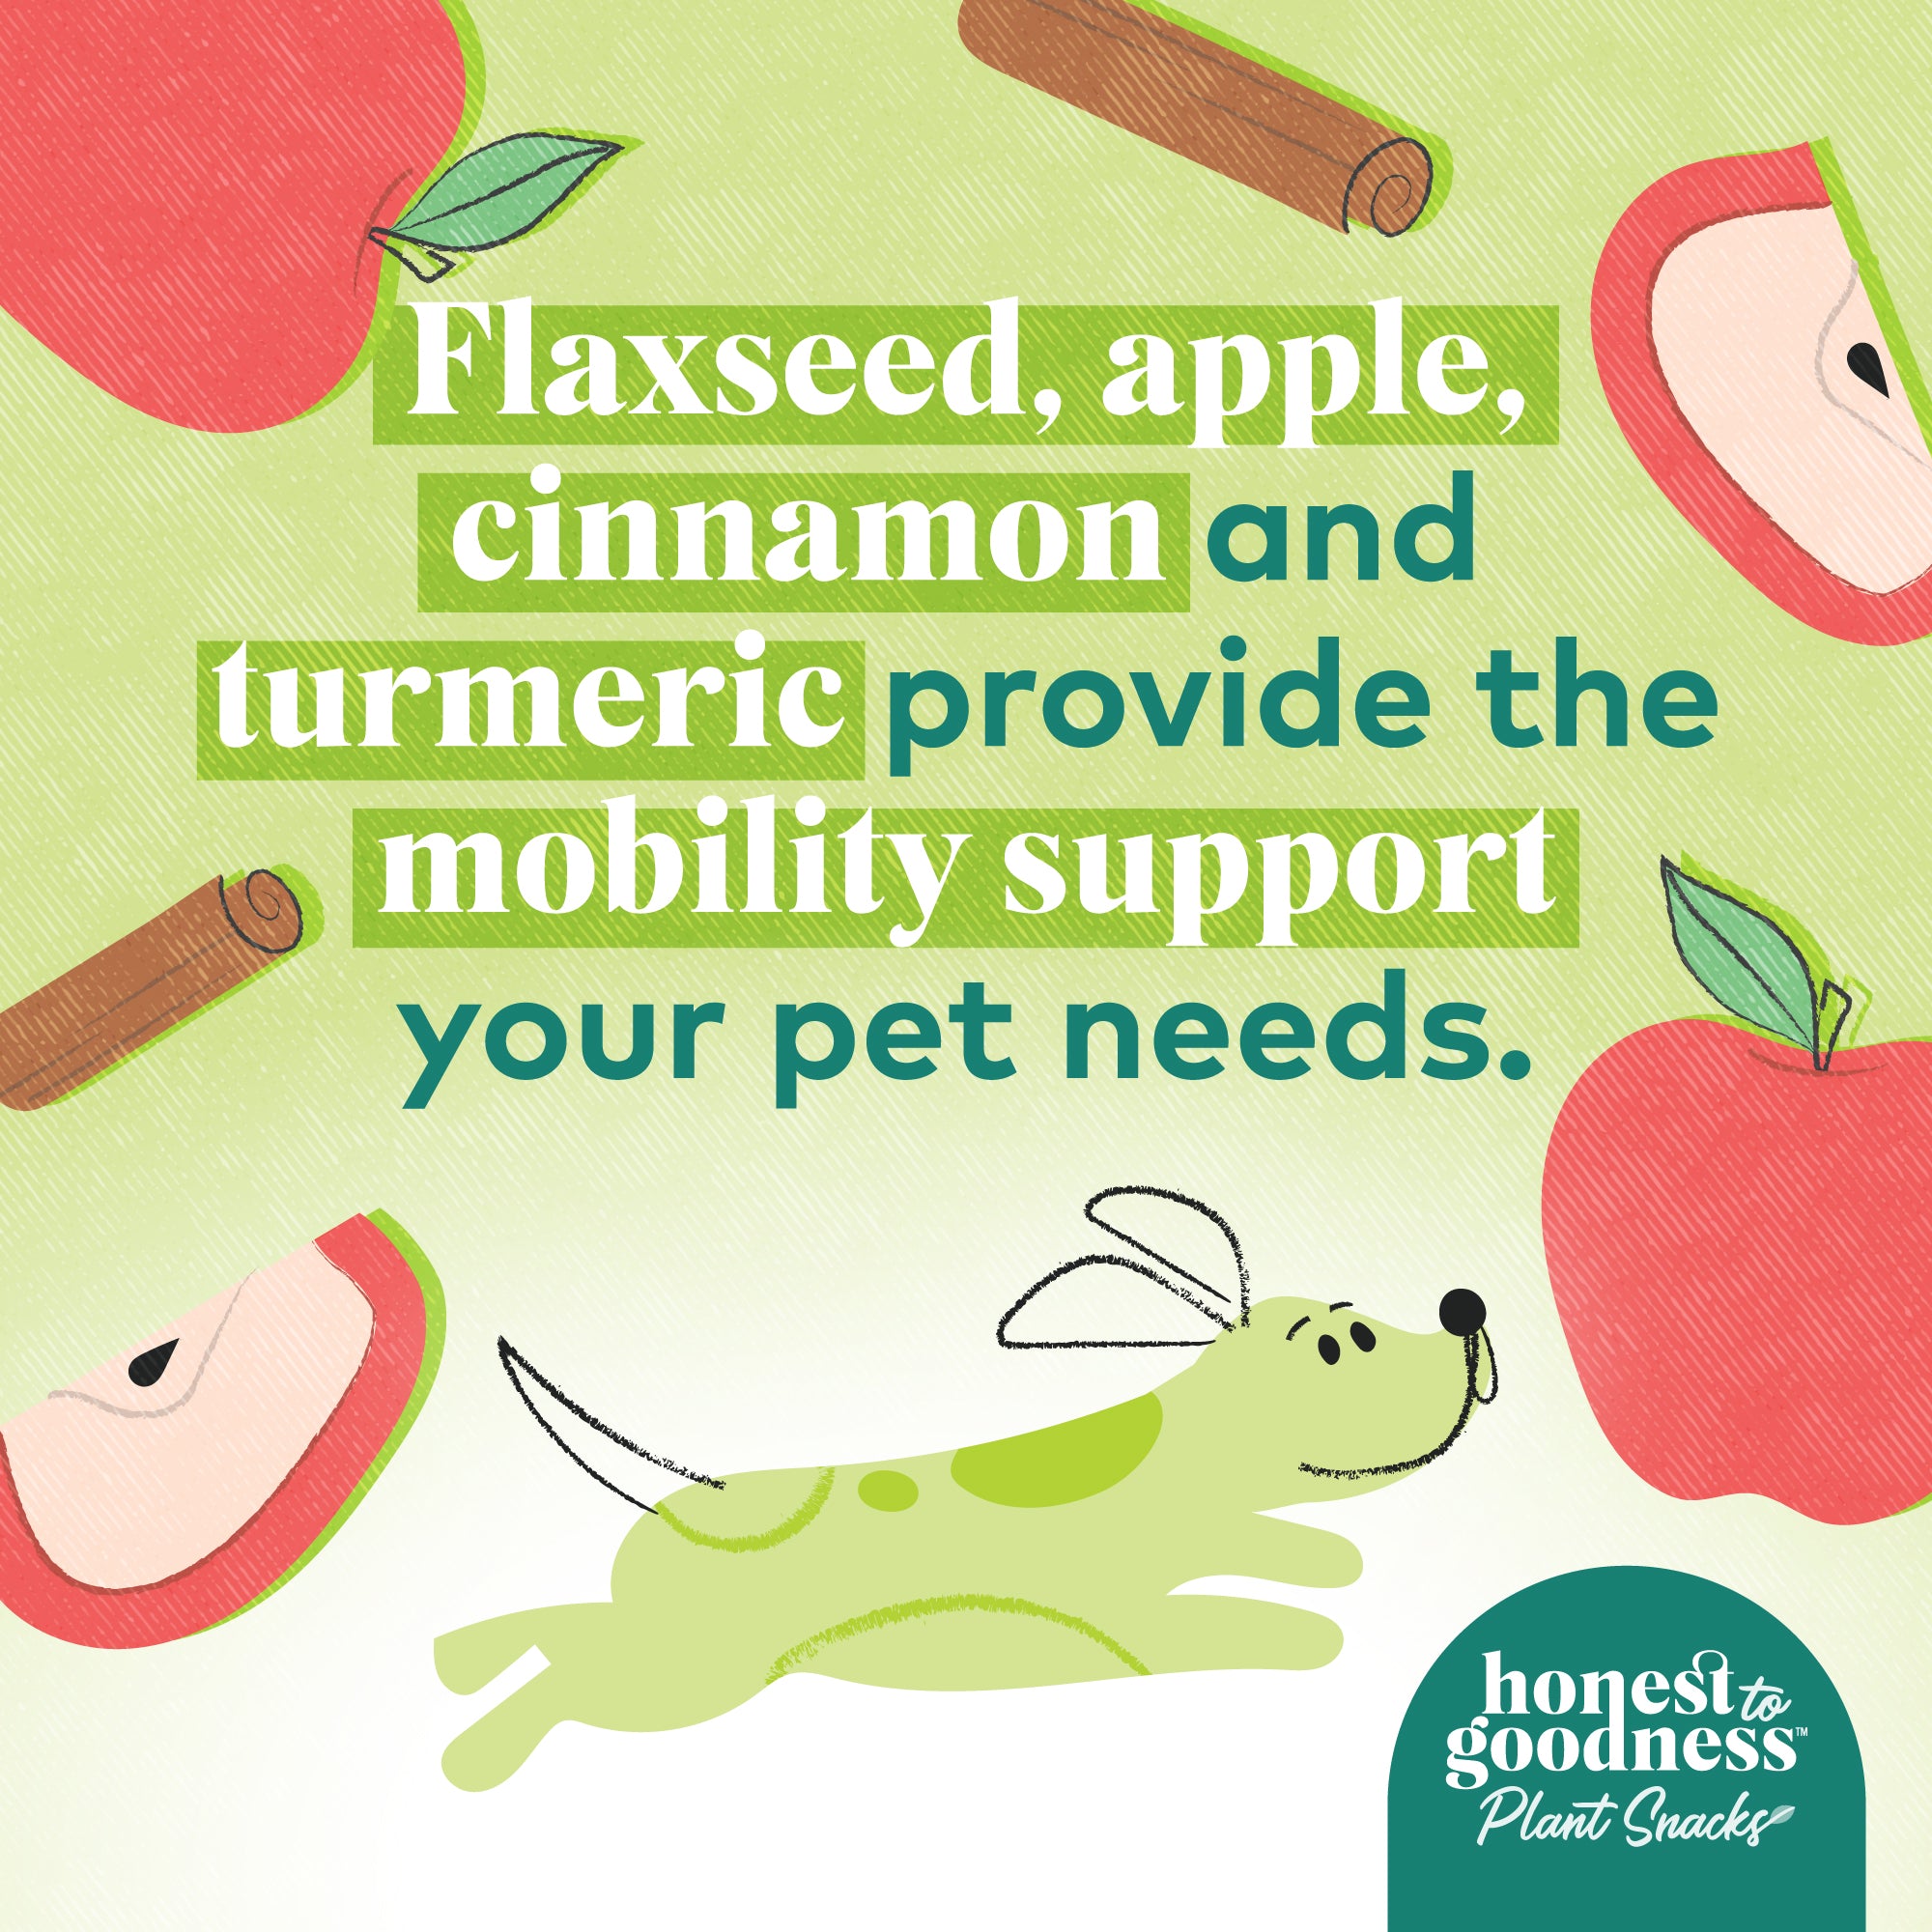 Honest to Goodness Flaxseed, apple and cinnamon and turmeric provide the mobility support your pet needs.